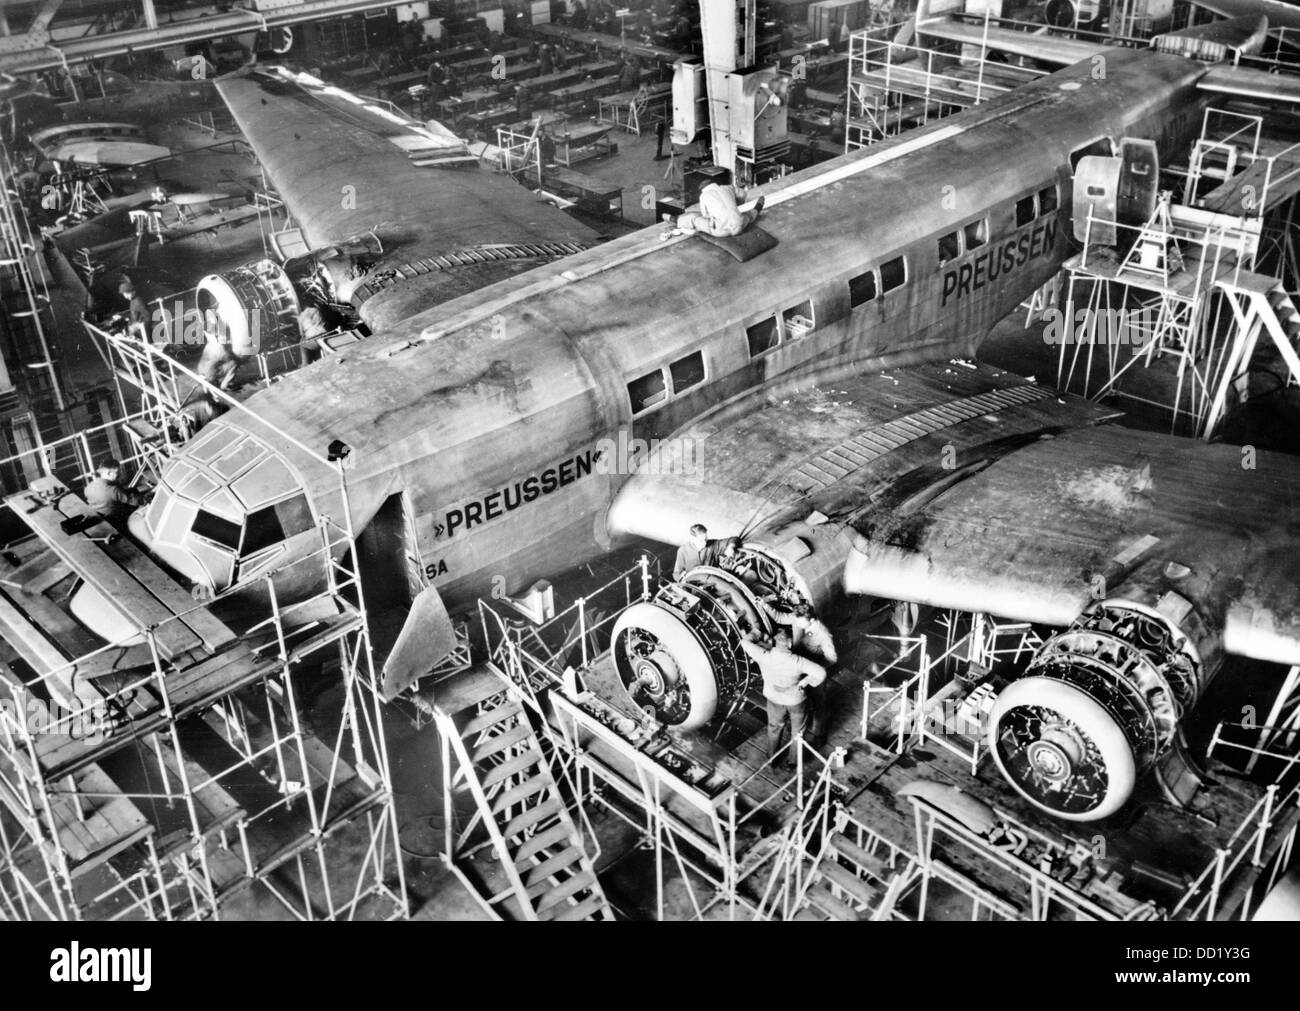 A Junkers Ju 90 type V2 'Preussen' under construction at the Junkers factory in Dessau, Germany, around 1938. Junkers Flugzeug- und Motorenwerke AG (Junkers Aircraft and Motor Manufacturing AG) was one of the leading defense industry manufacturer in the Third Reich. The manufacturer writes on the back of the picture: 'Final assembling of an airliner Junkers Ju 90. The picture shows one of the aircrafts that can hold 40 passengers and offers maximum comfort, built at the request of the German Lufthansa. Fotoarchiv für Zeitgeschichte Stock Photo